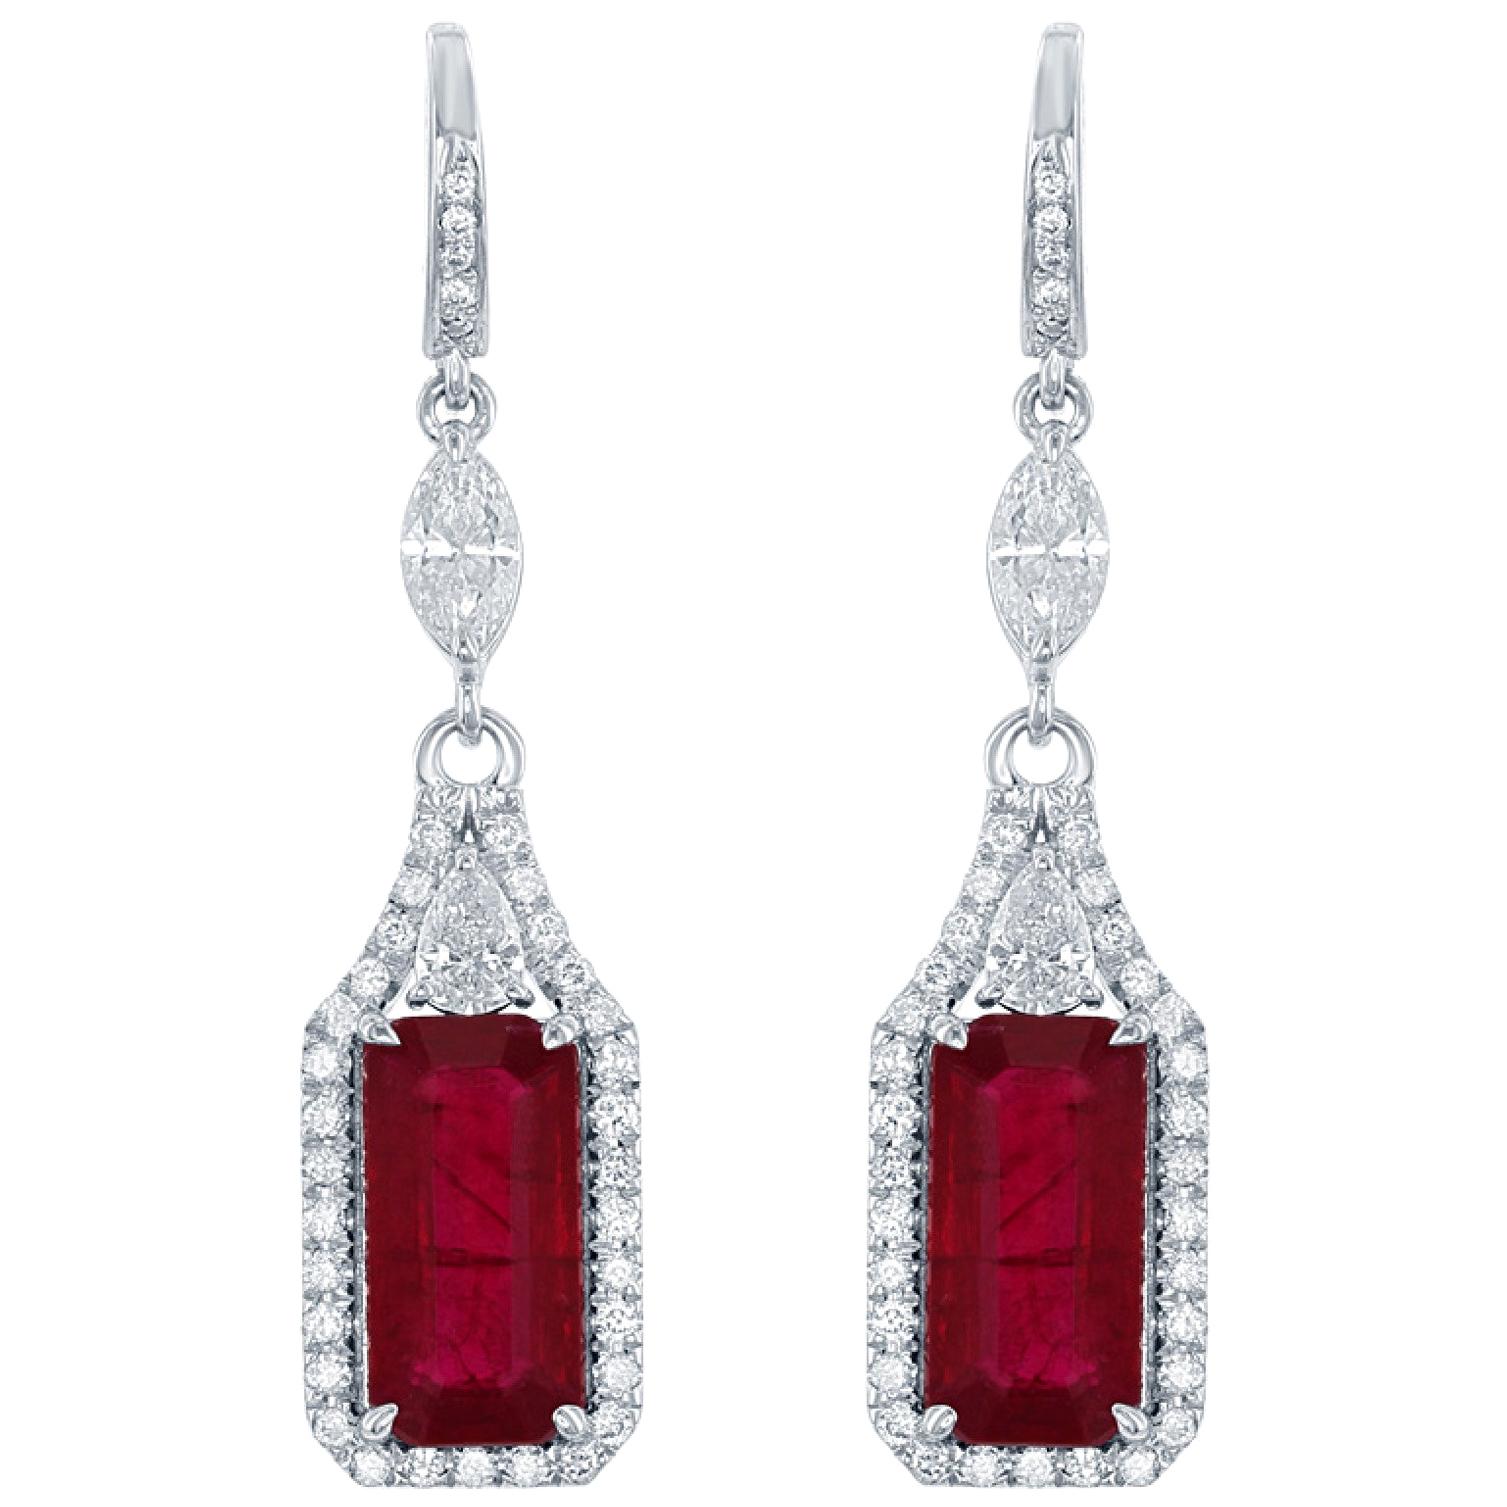 5.10 Carat Emerald Cut Ruby Earrings with 1.45ct of Diamonds in 18kt White Gold For Sale